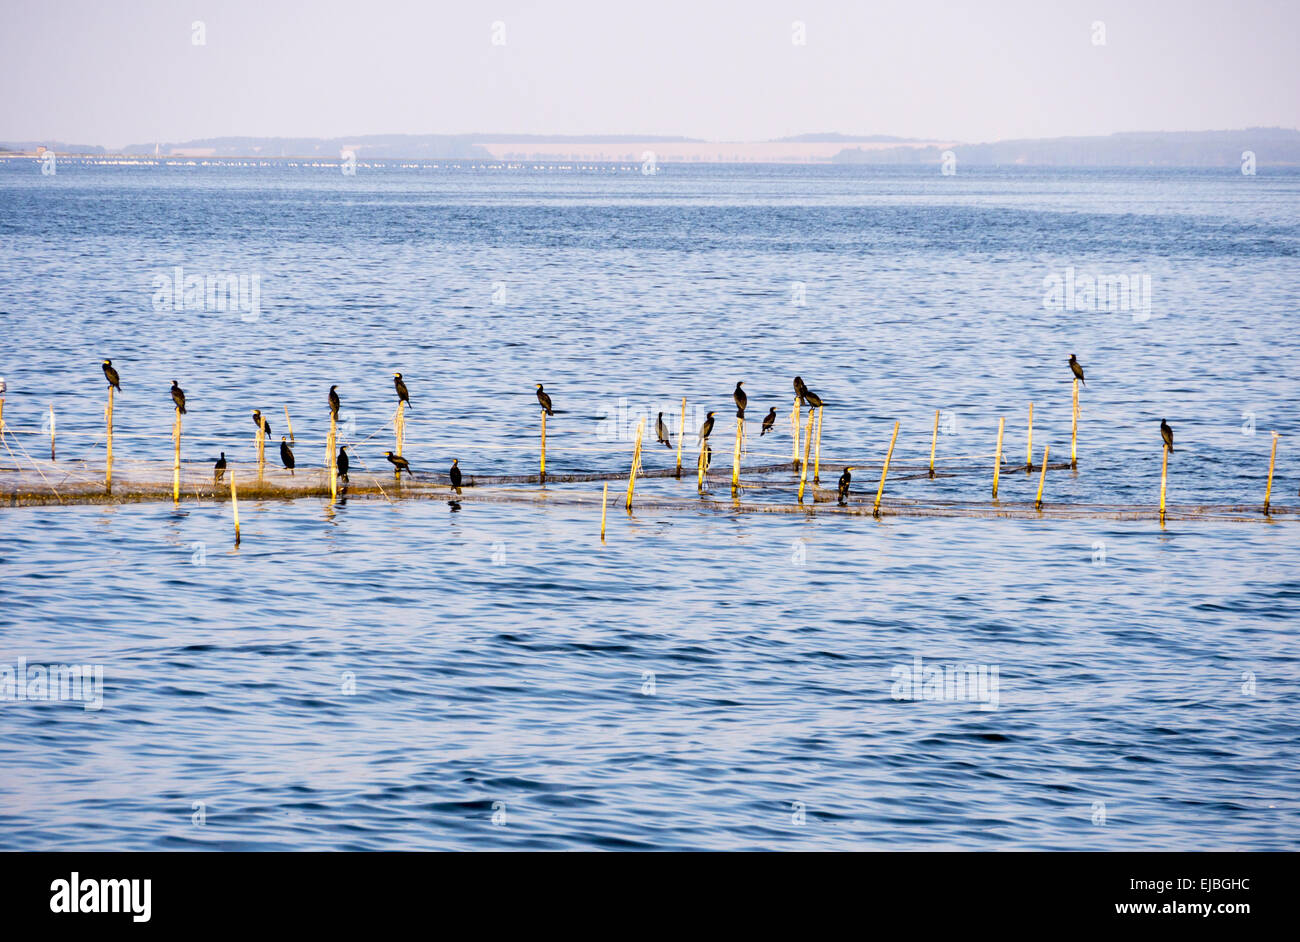 Cormorants on networks at the bay Stock Photo